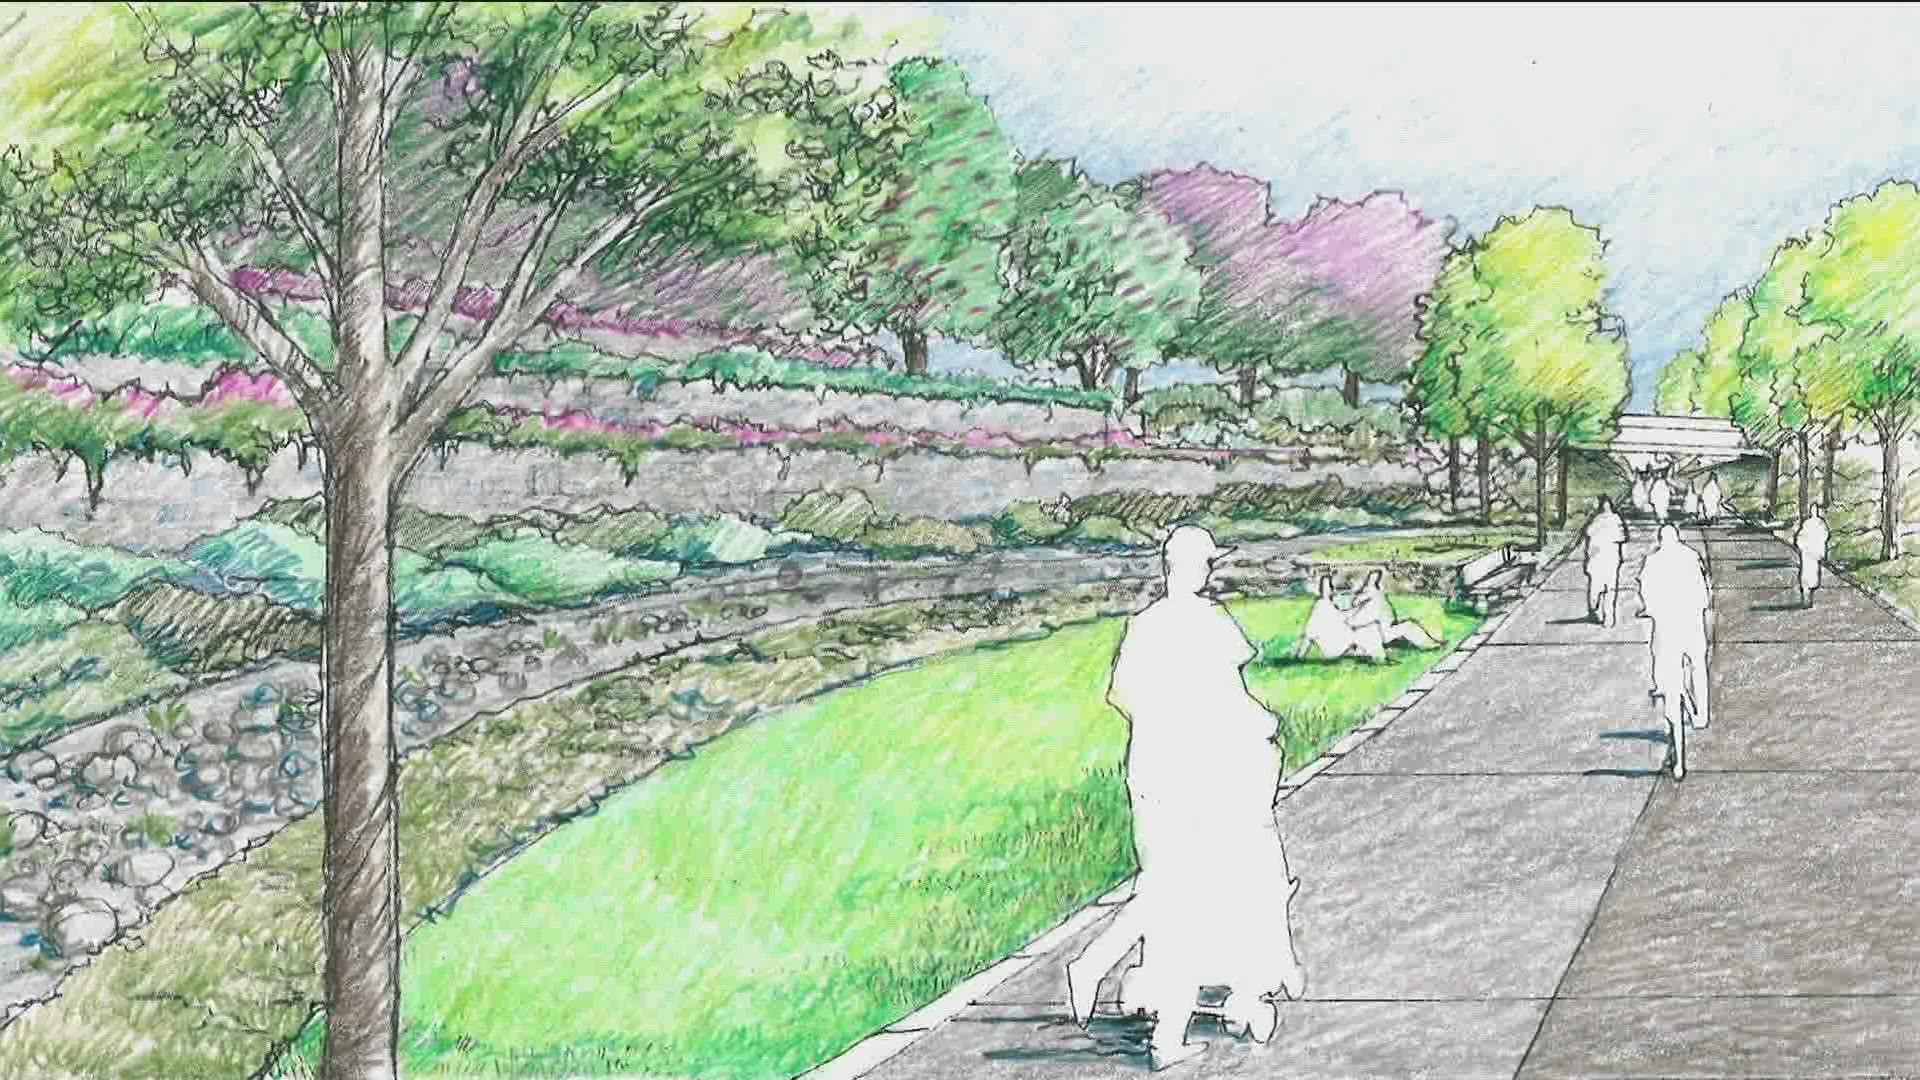 The Atlanta Beltline will connect to the gardens with the expansion slated to be done by 2026.